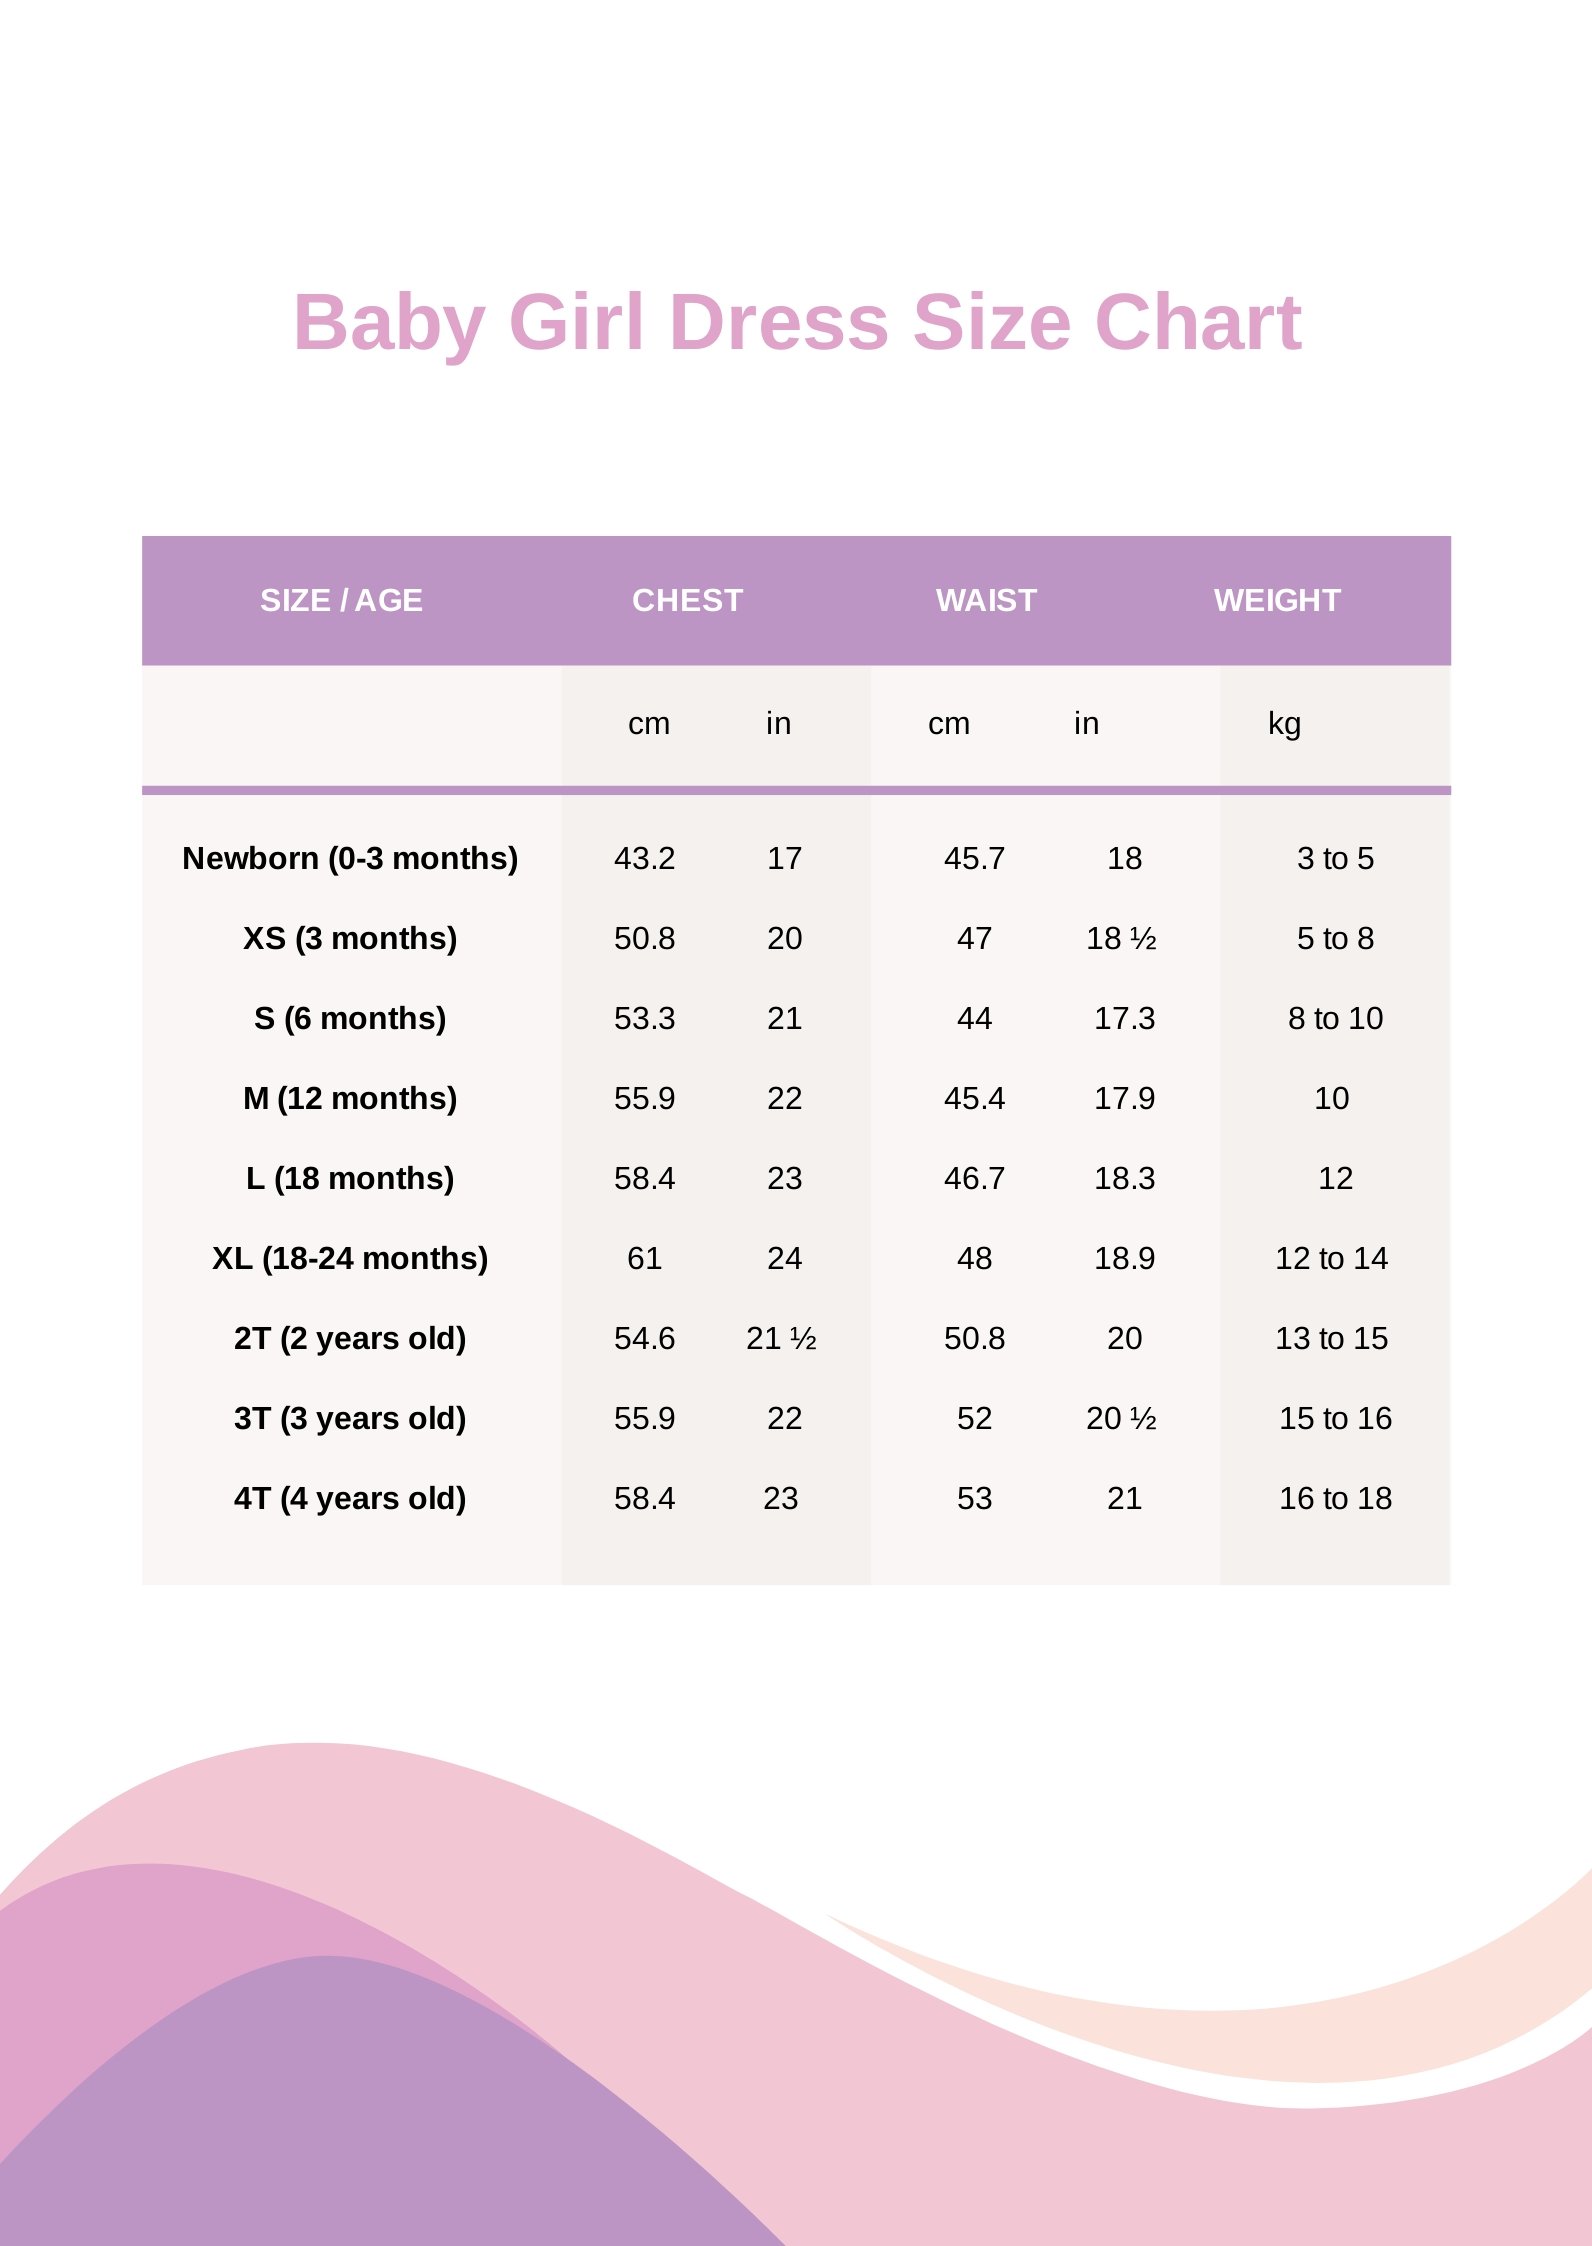 Baby Girl Dress Size Chart in PDF